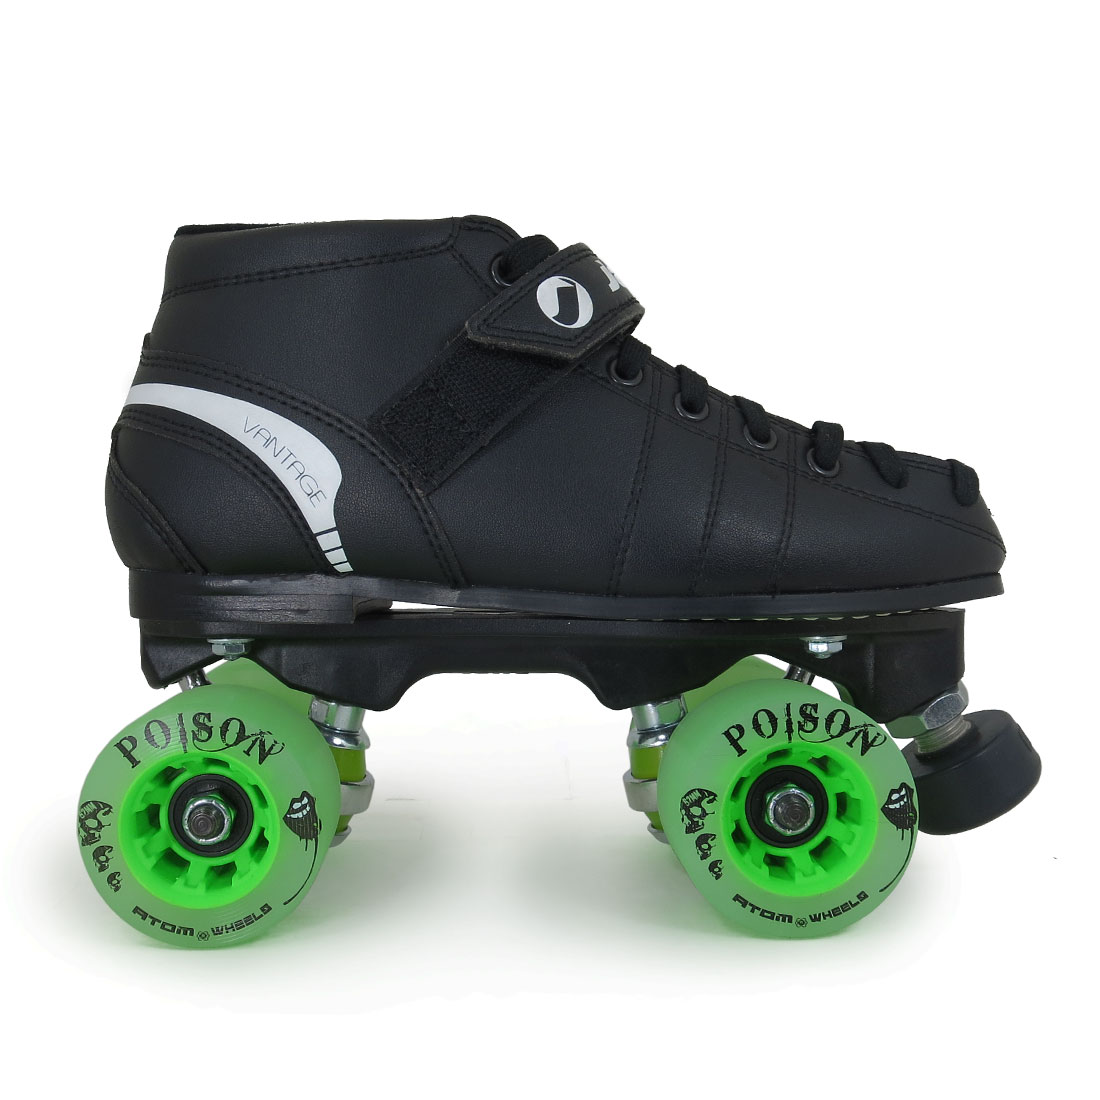 Put on Skating Shoes, Skate whenever you want! (Roller & Ice